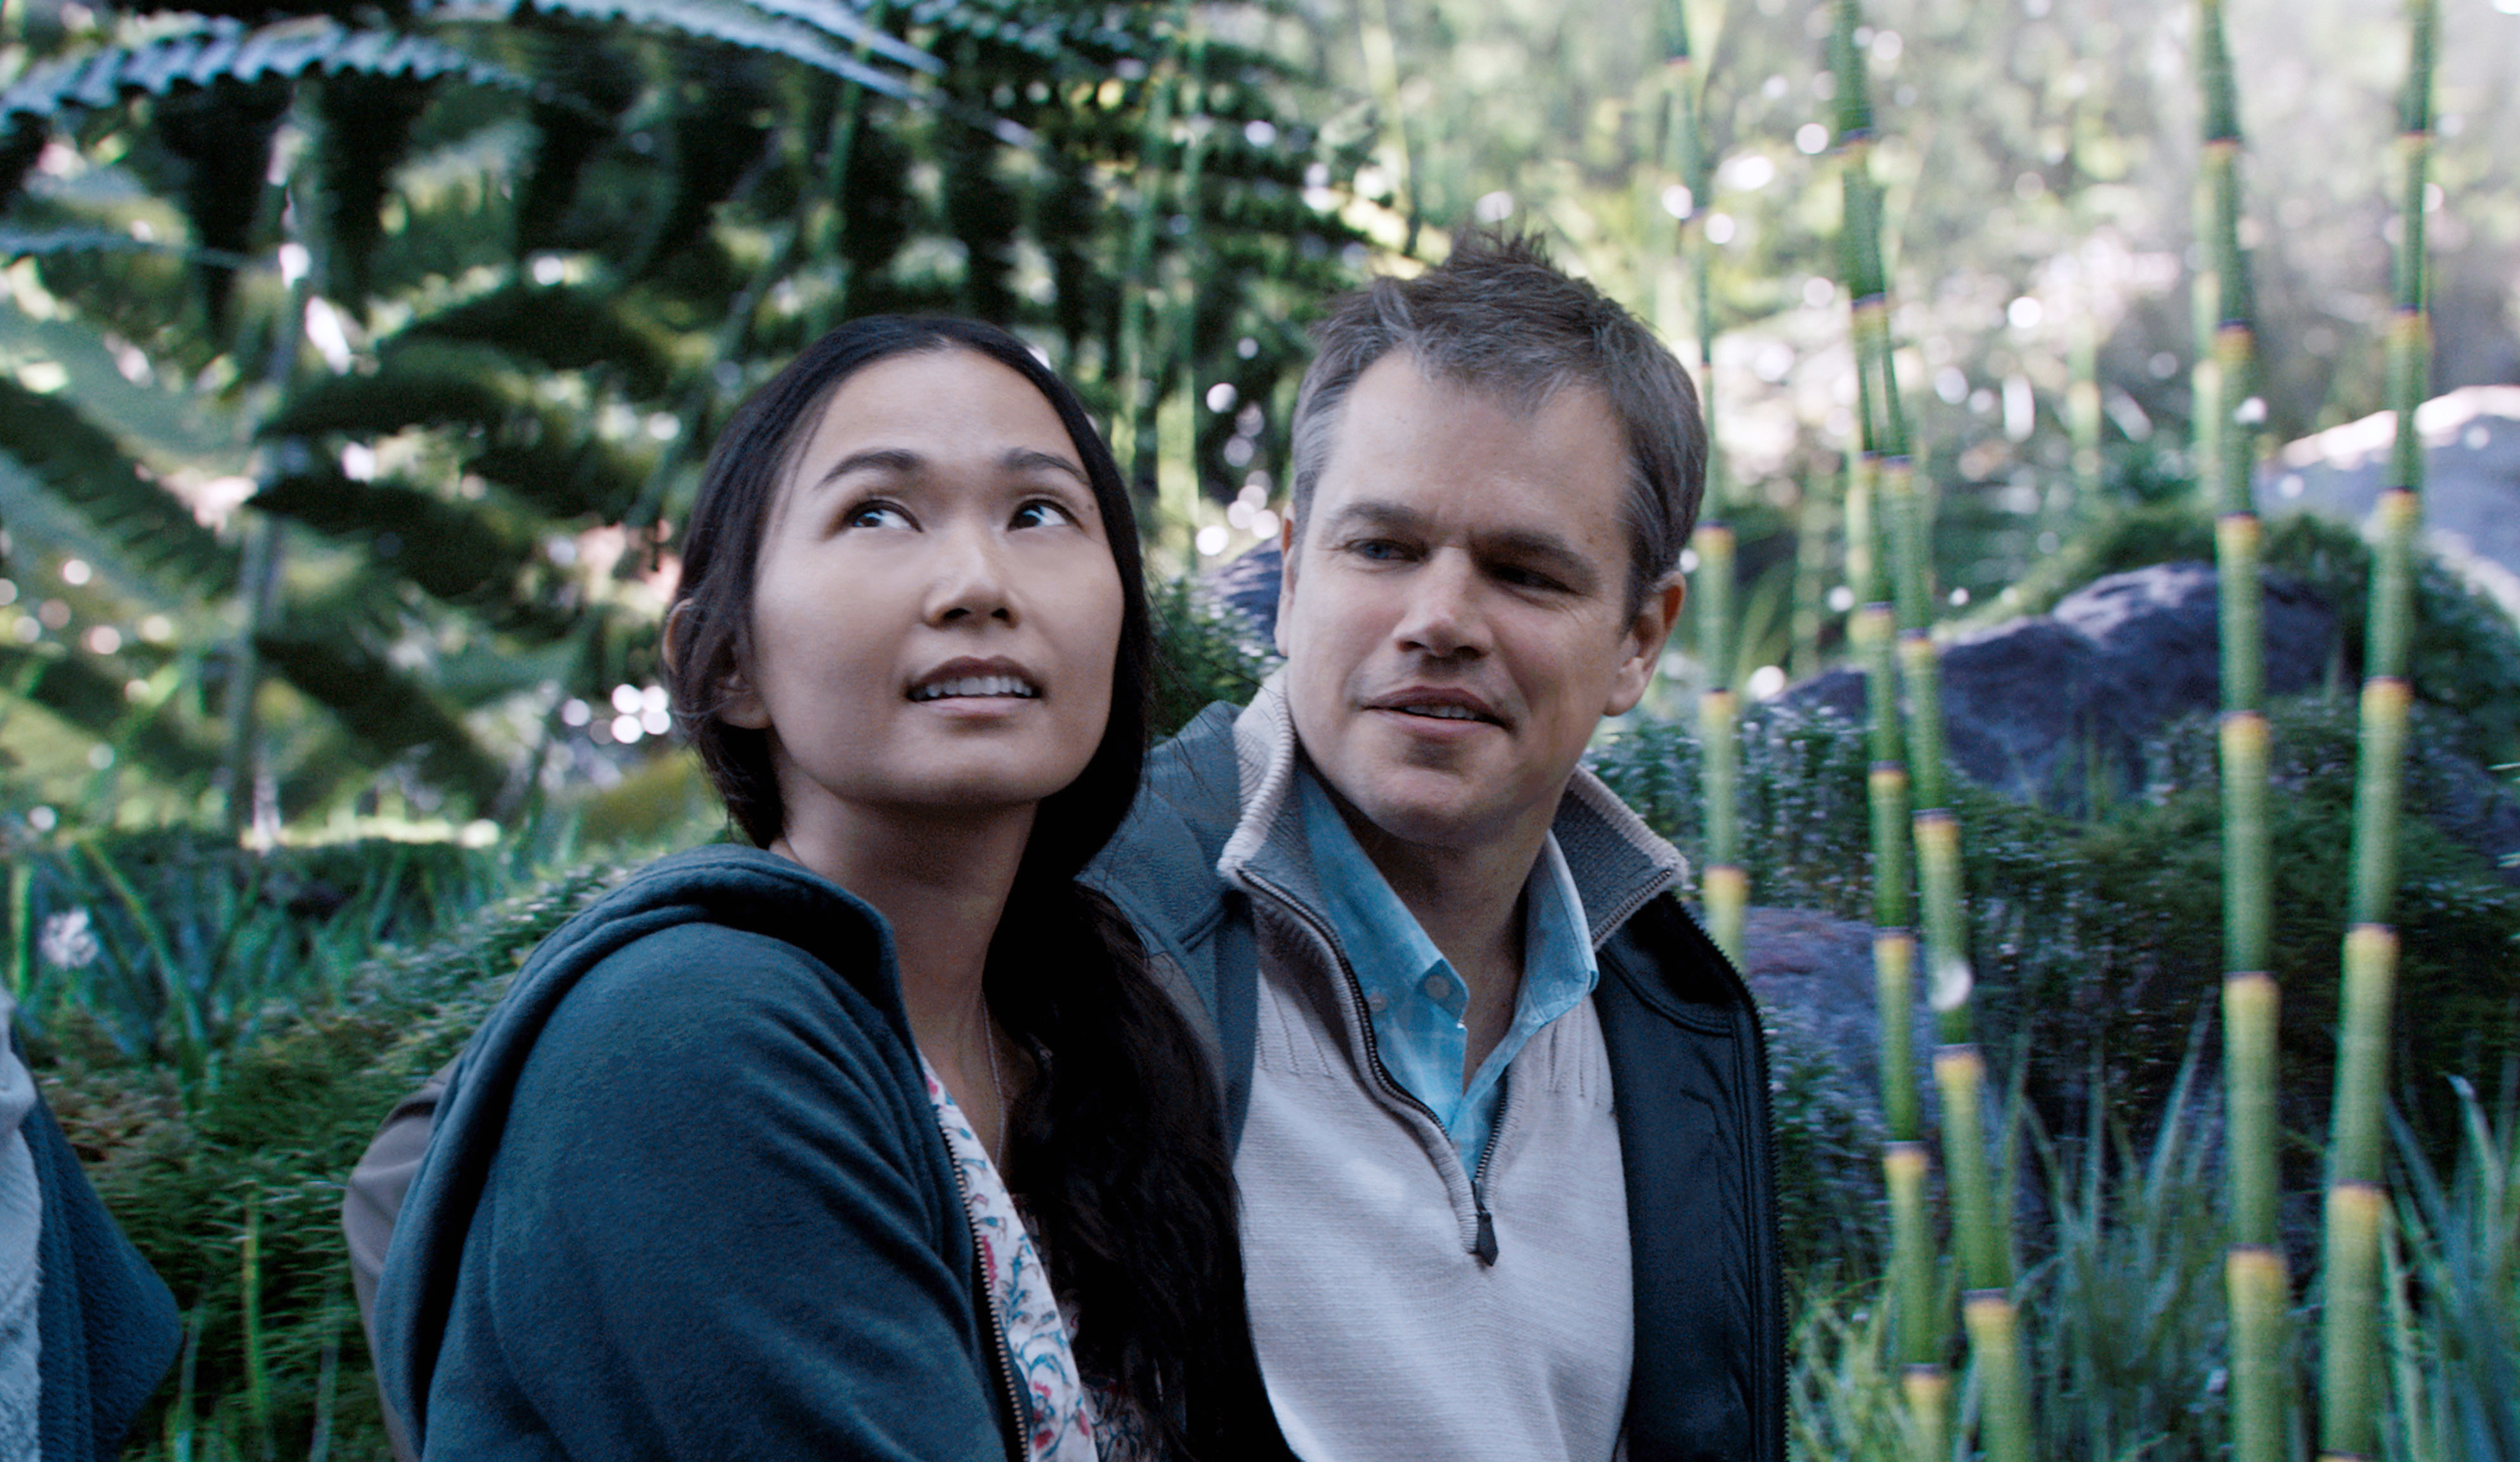 Two people gazing upward with curious expressions, standing outdoors